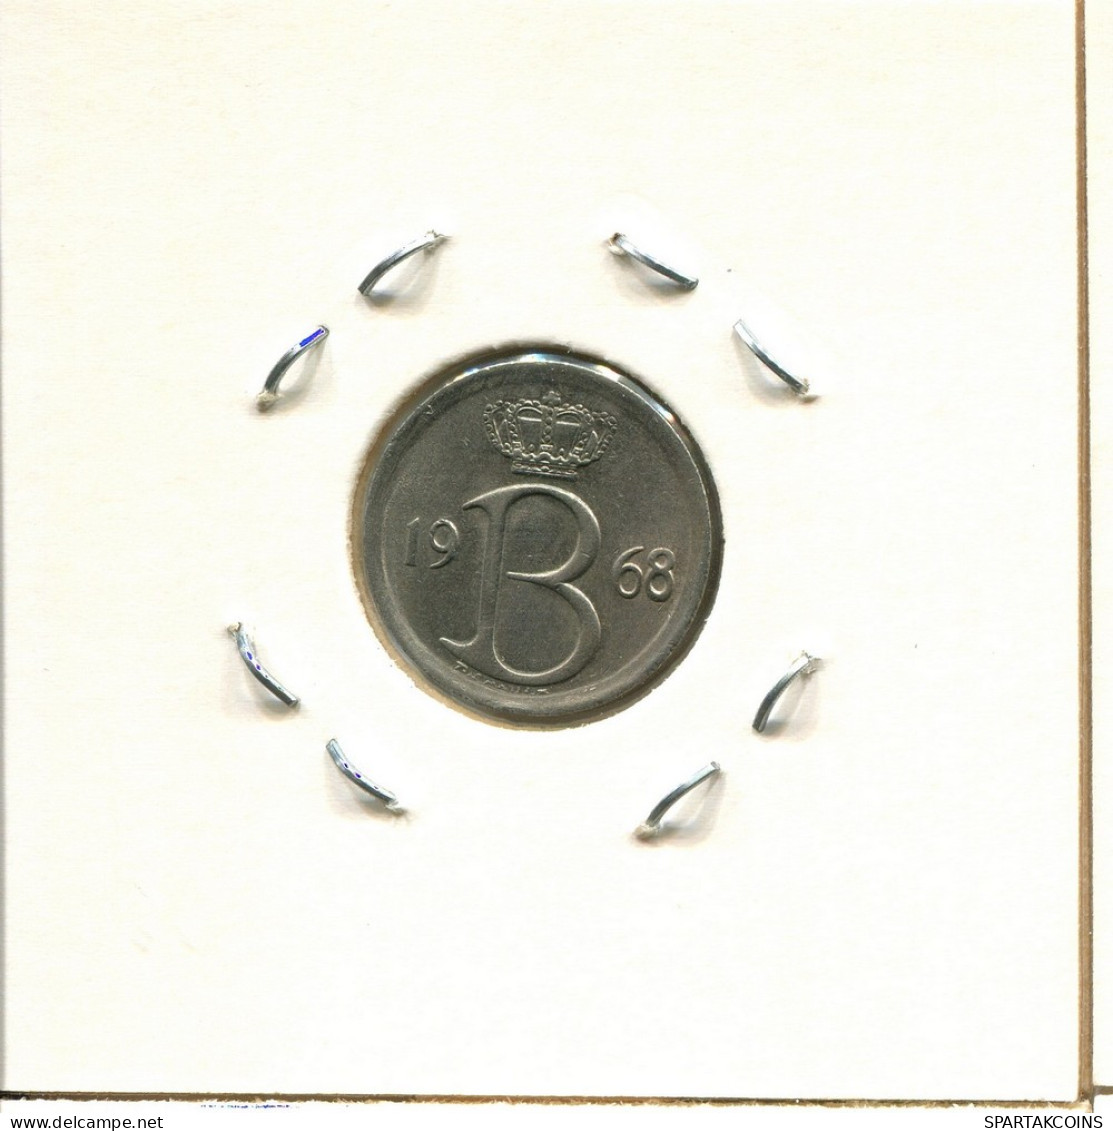 25 CENTIMES 1968 FRENCH Text BELGIUM Coin #BA330.U - 25 Centimes